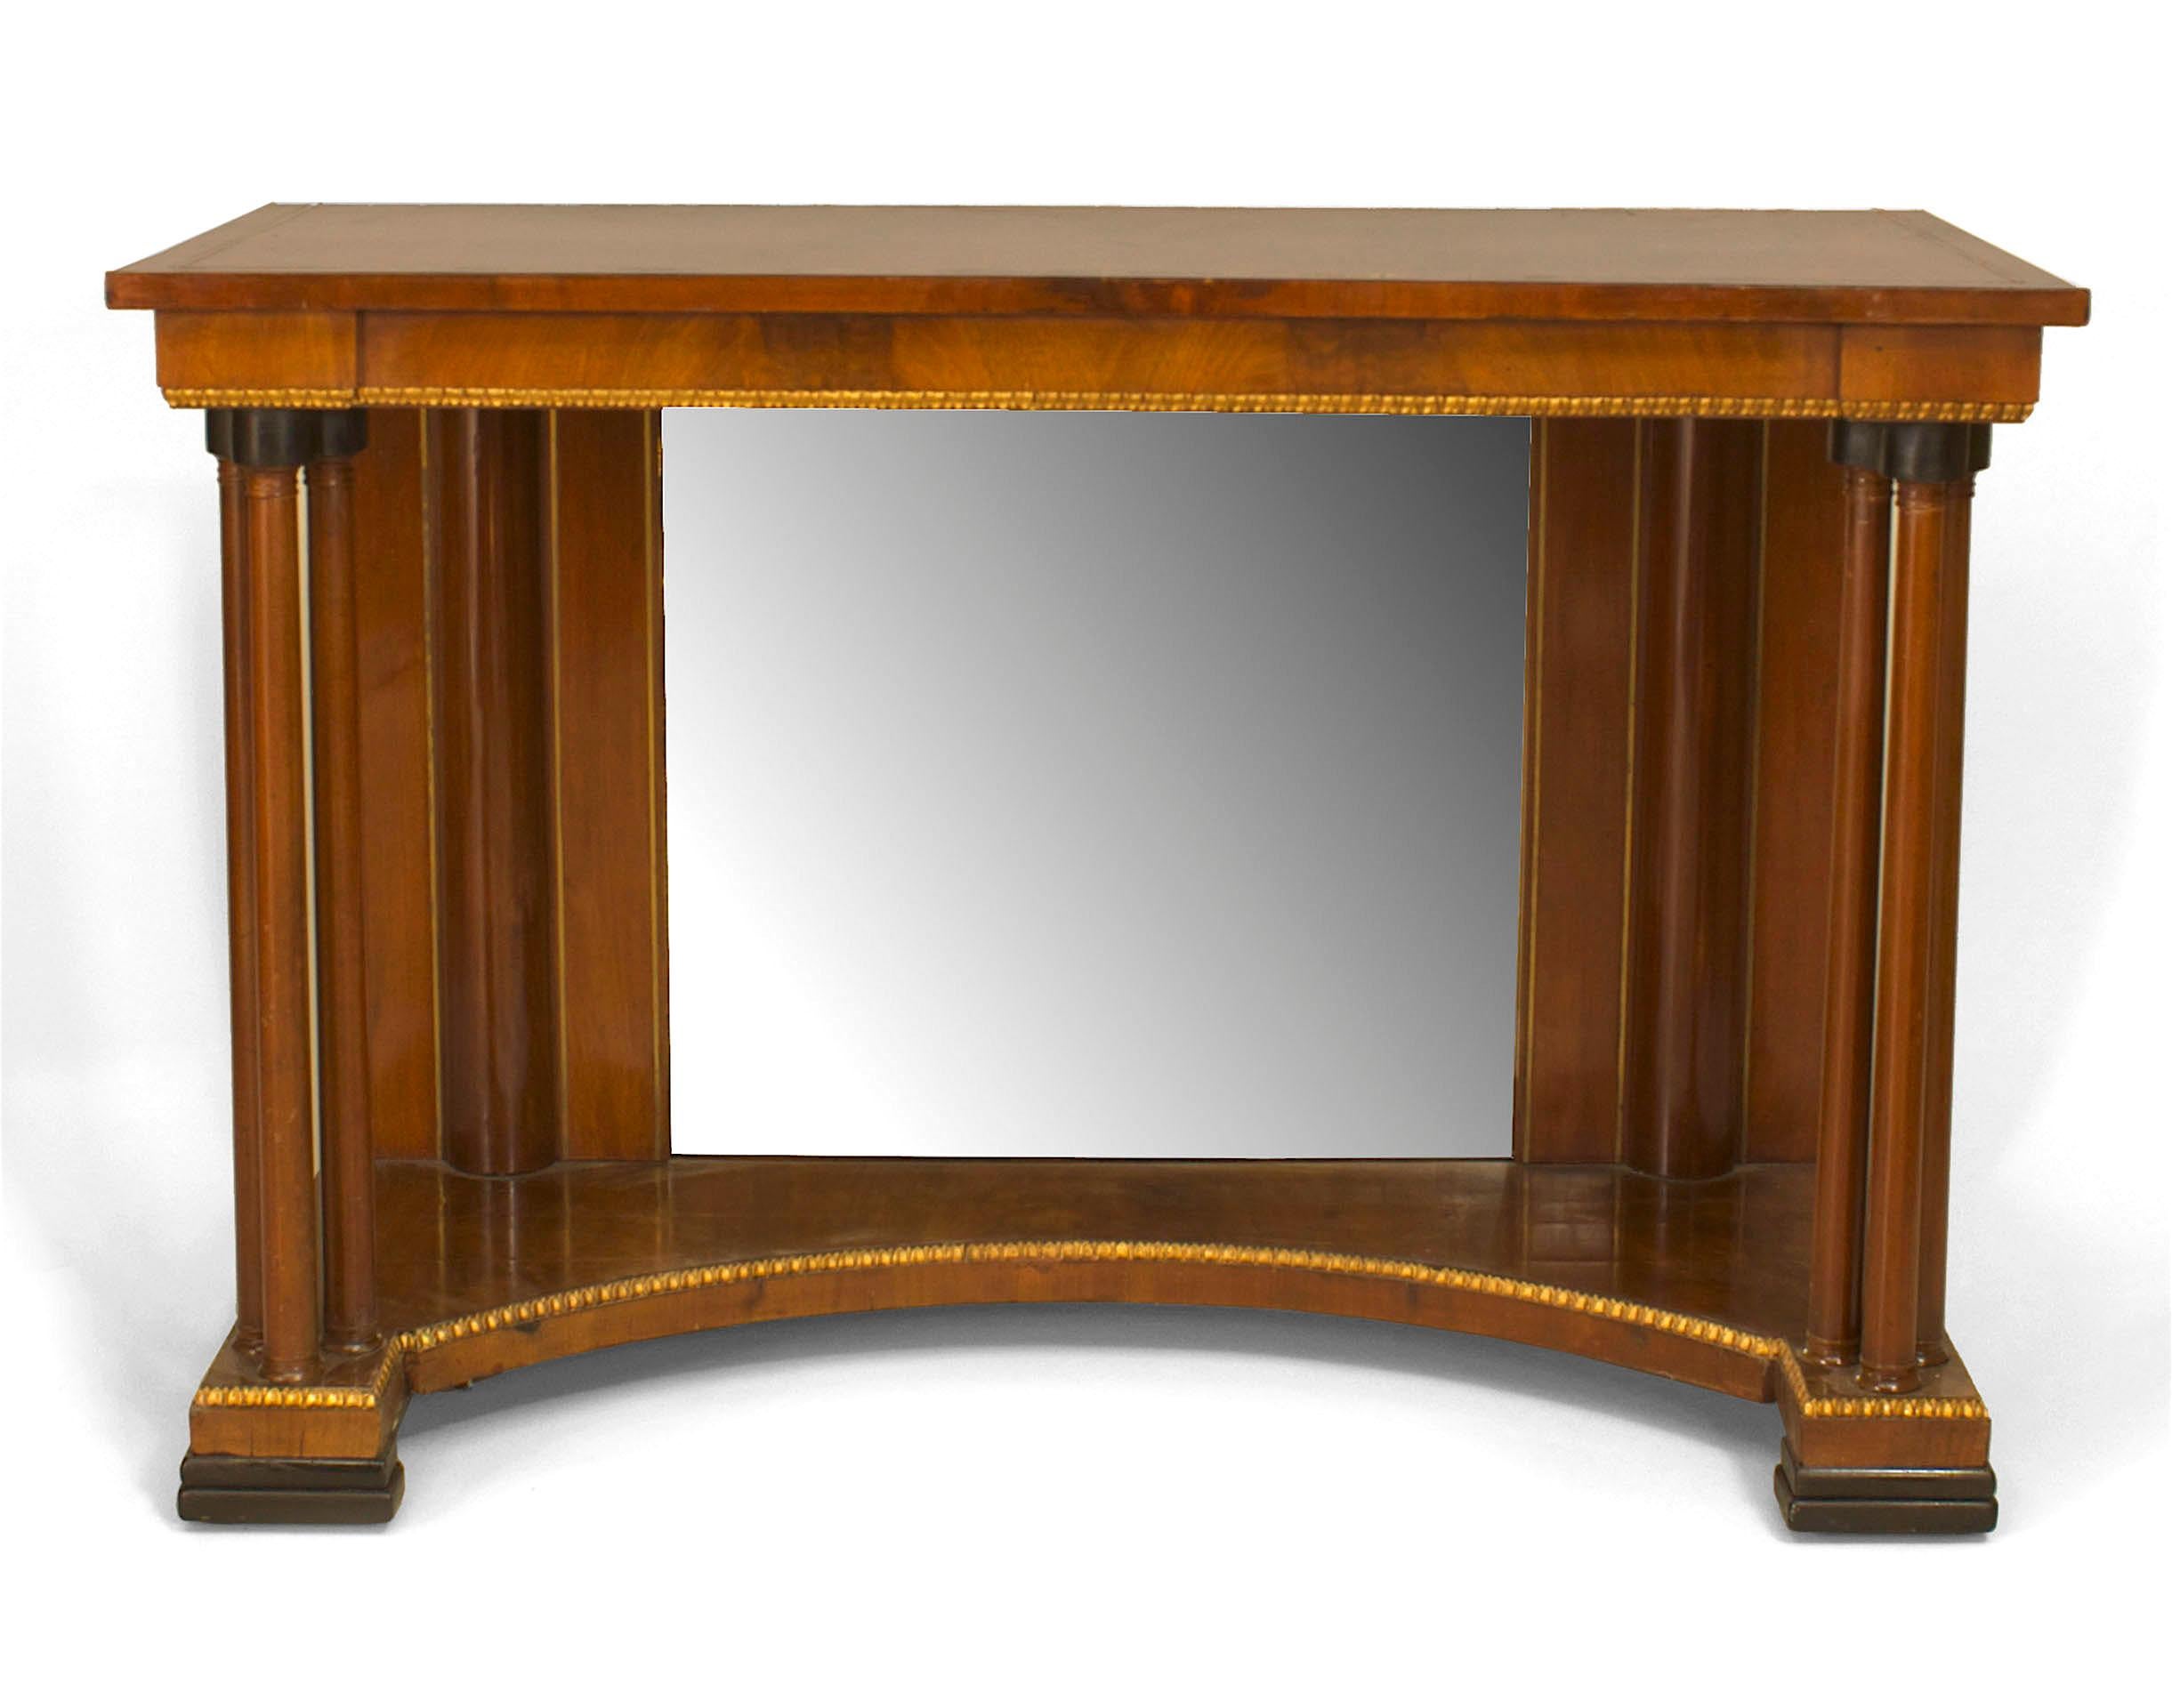 Russian neoclassic style mahogany and brass banded inlaid top console table with parcel gilt and ebonized trim having three columns over a concave fronted base and a mirror backing (19th century).
 